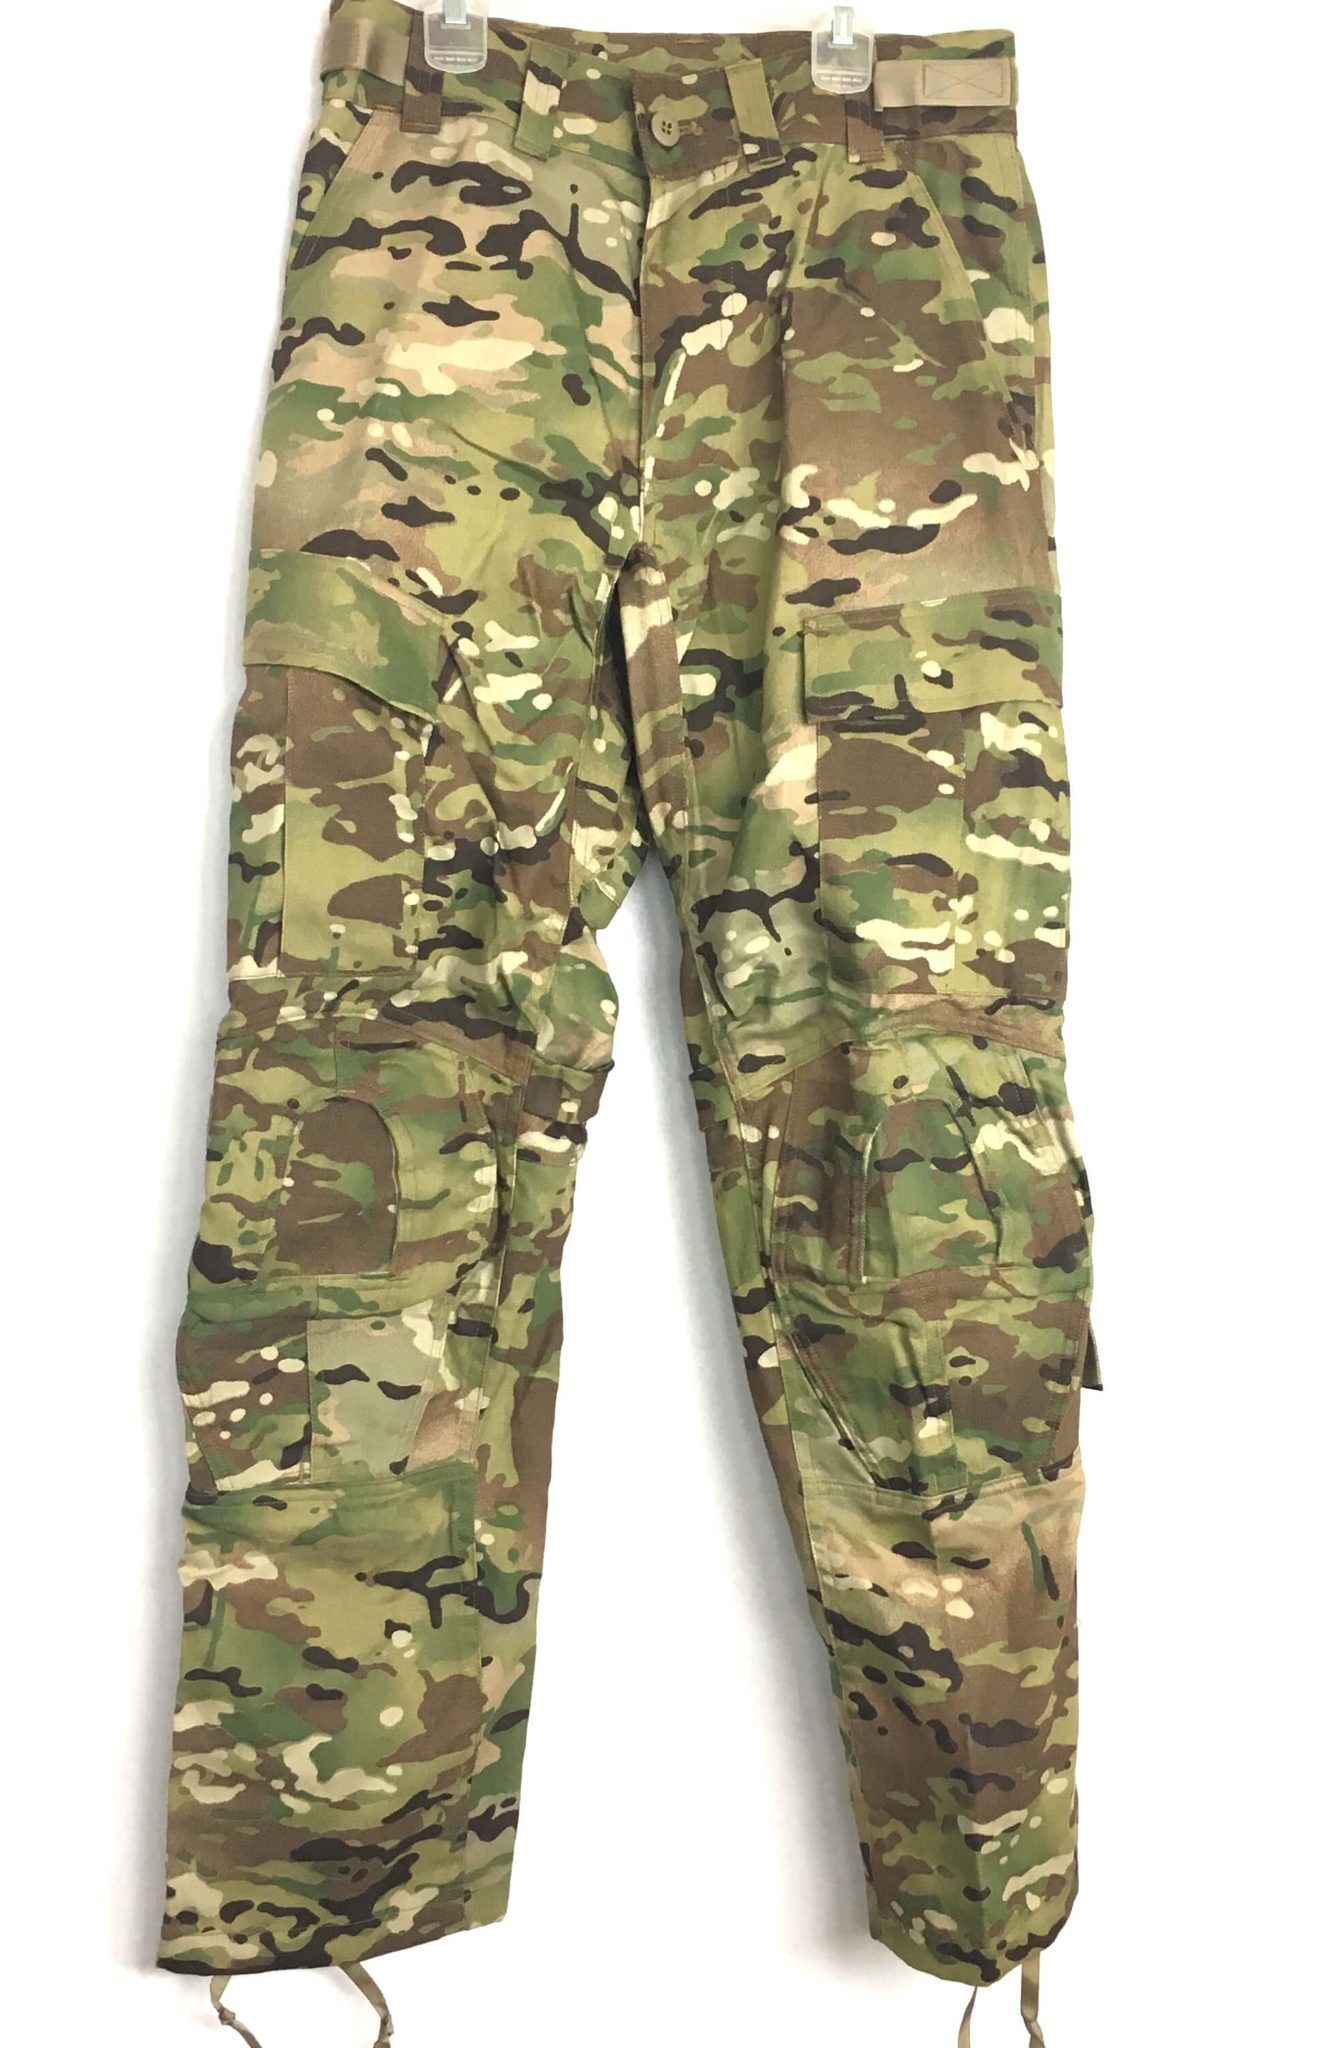 this Travel Subordinate Multicam Combat Pants W/ Knee Pad Slots - FAST Delivery of GI Surplus